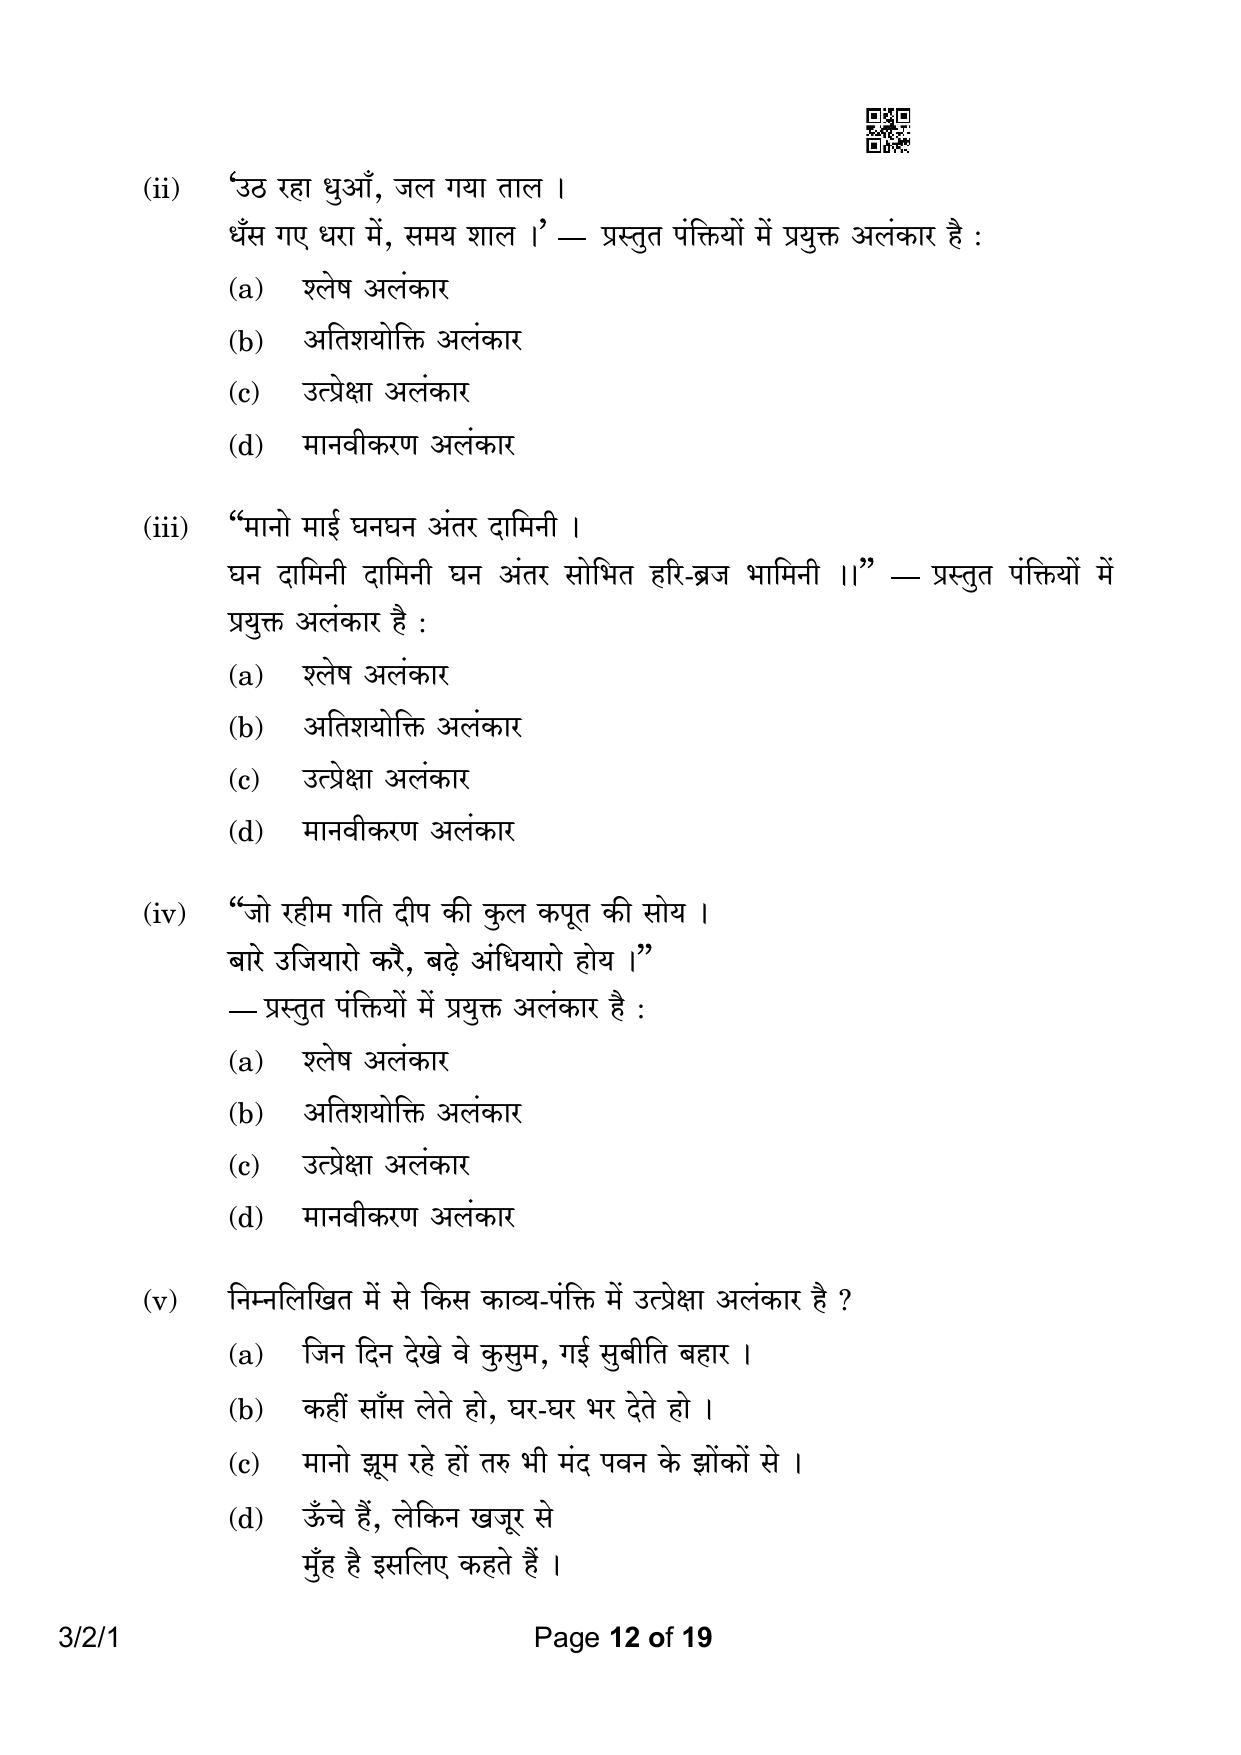 CBSE Class 10 3-2-1 Hindi A 2023 Question Paper - Page 12